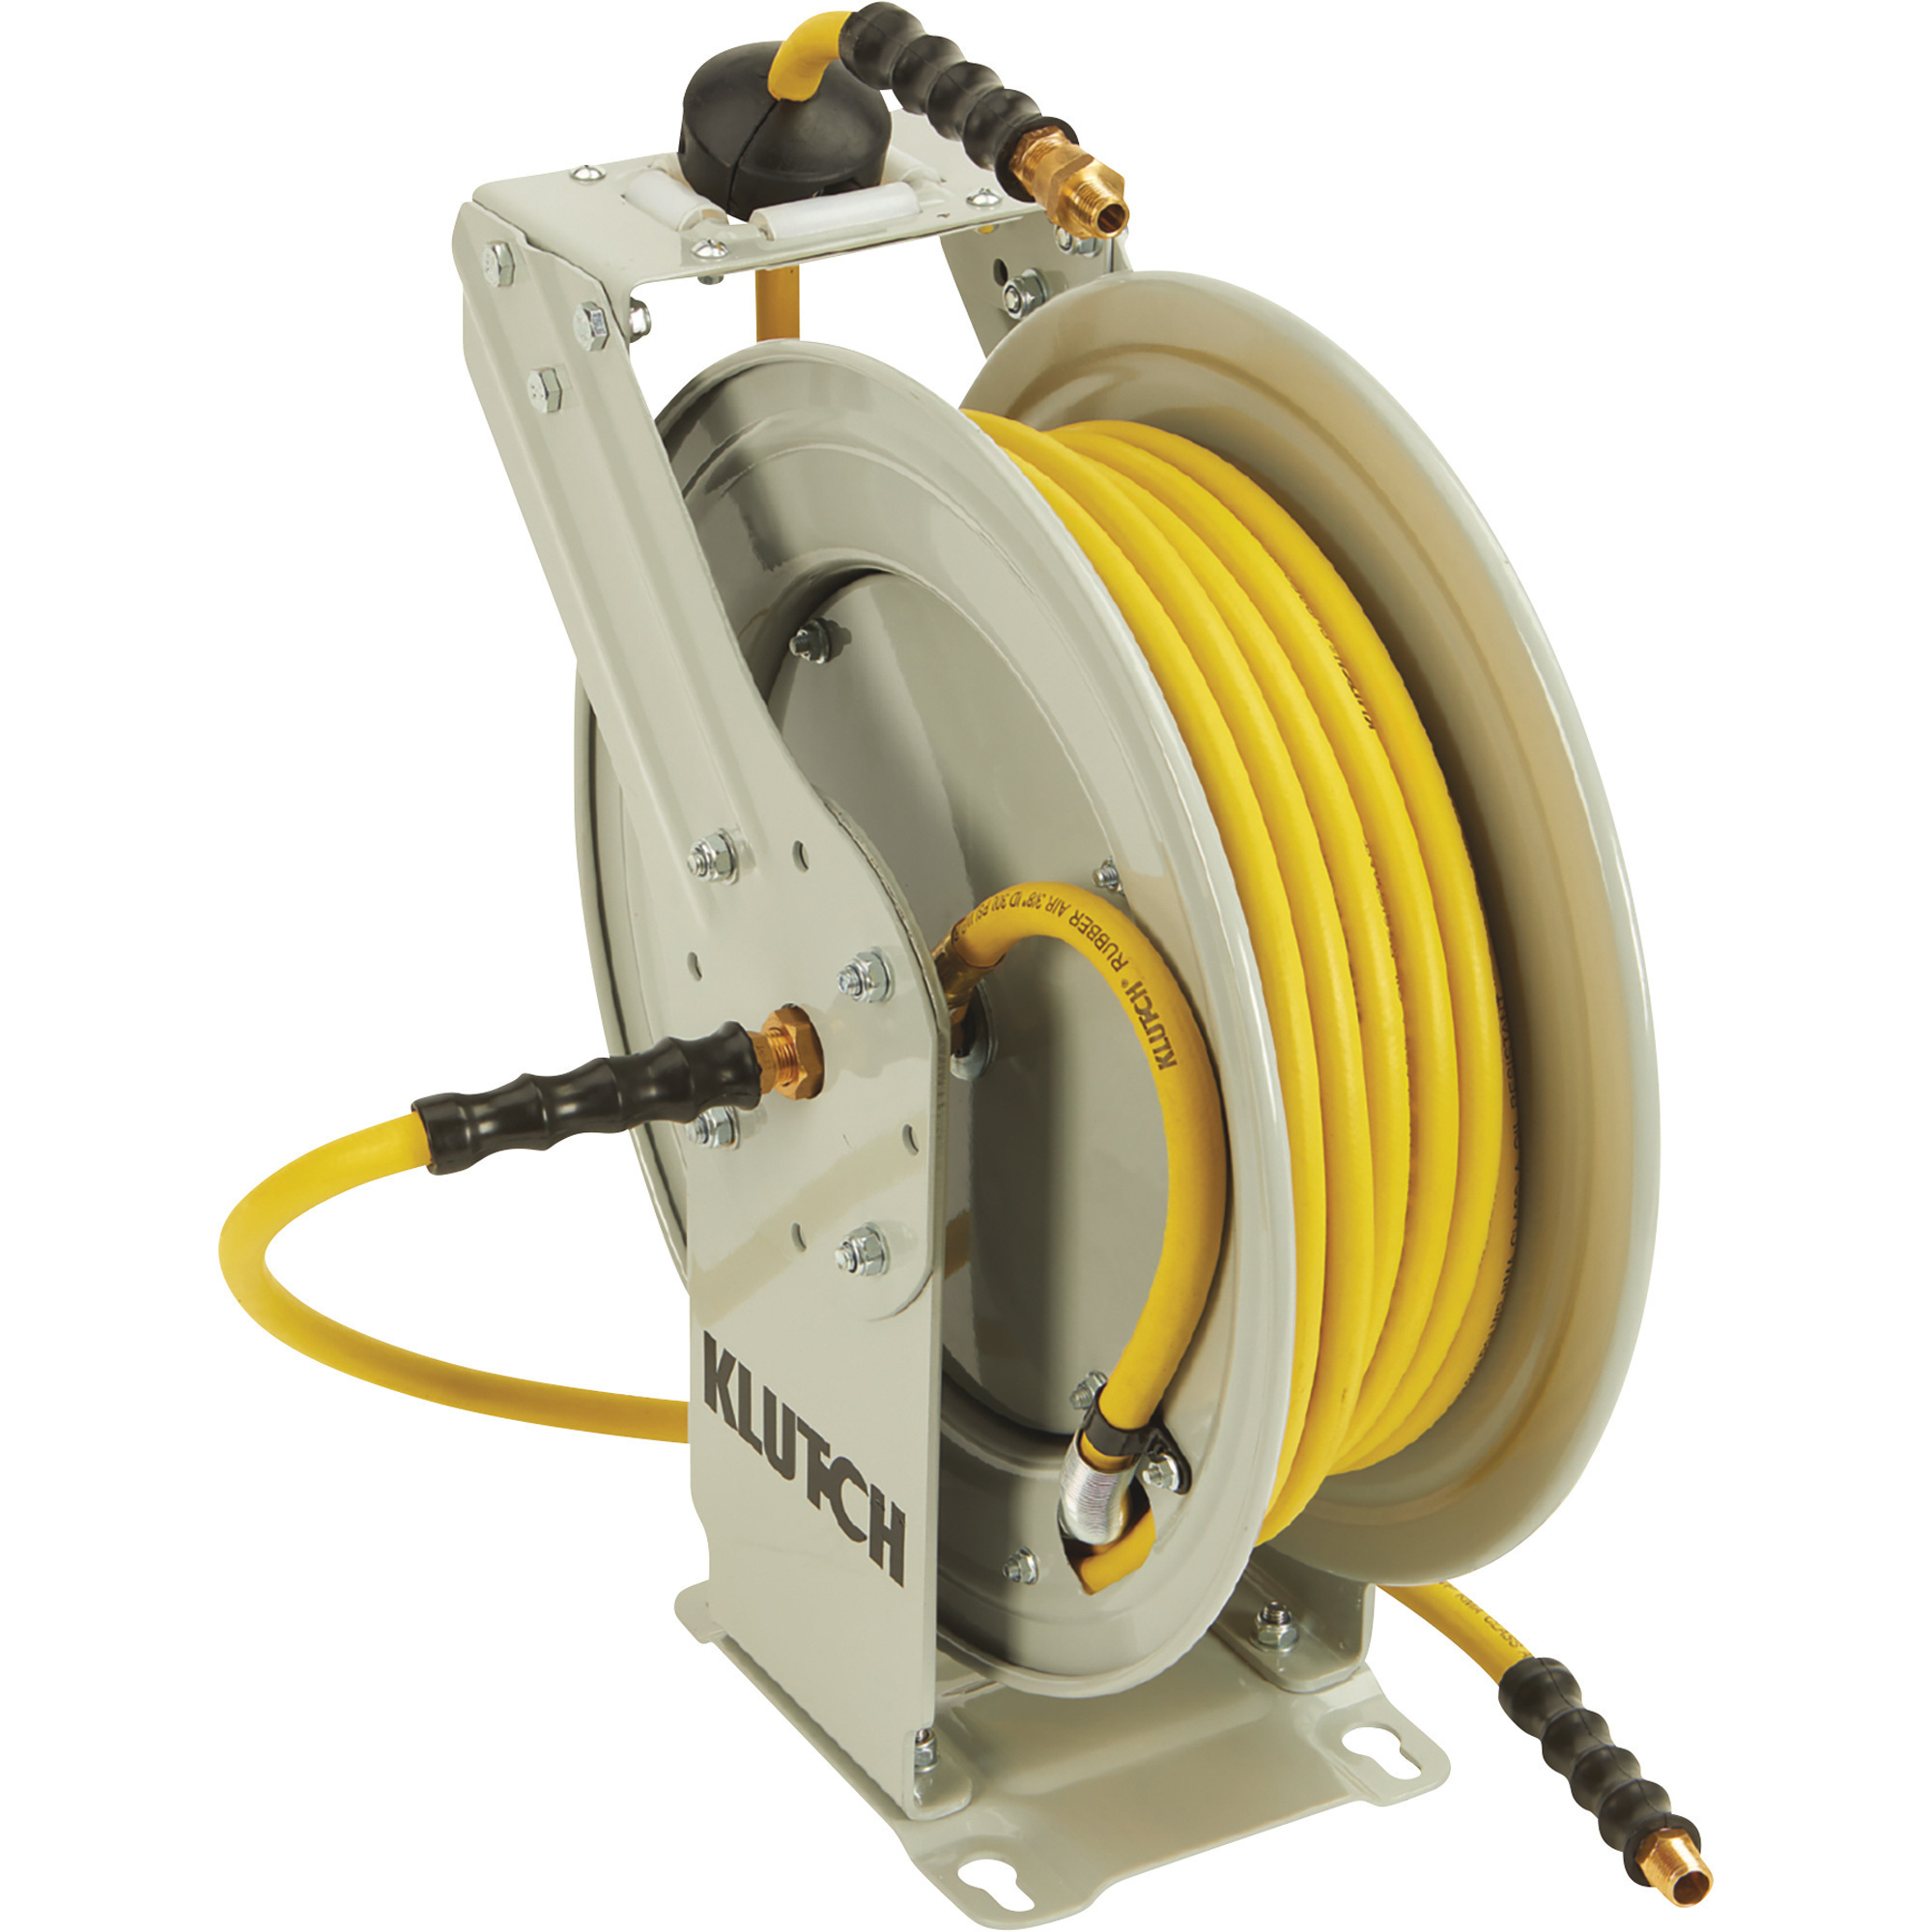 Klutch Auto-Rewind Air Hose Reel, with 1/2Inch. x 100ft. Oil-Resistant Rubber Hose, 300 PSI, Model OSRDA12100-NT